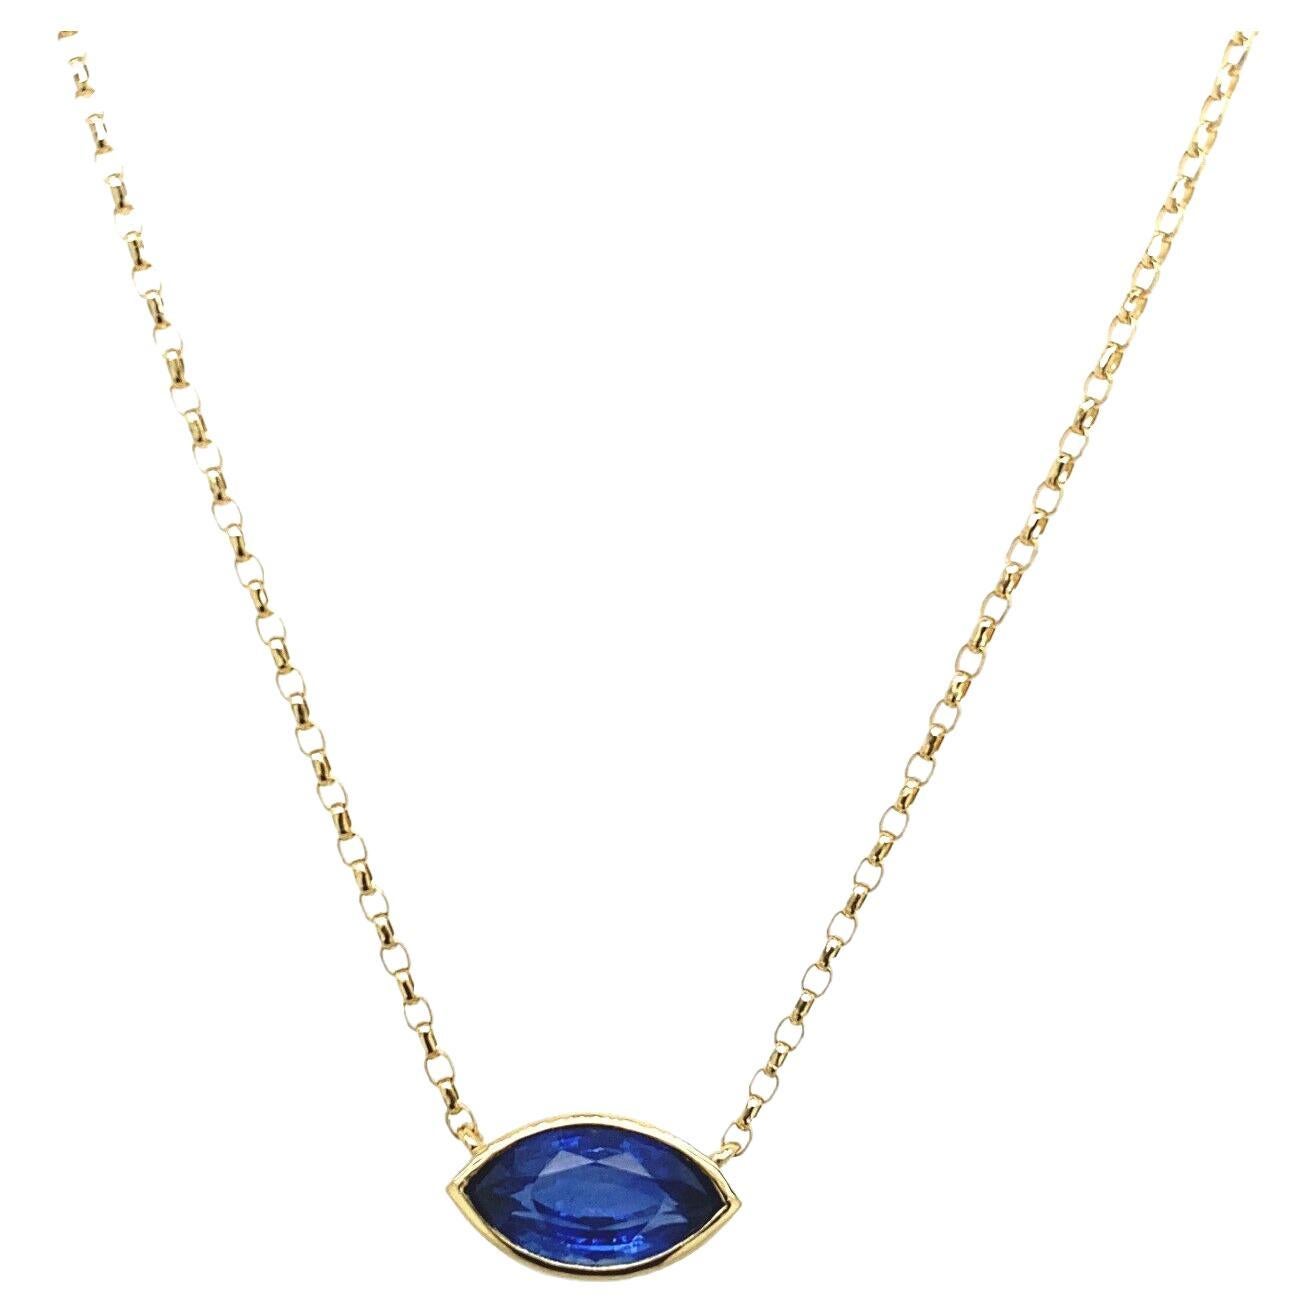 1.32ct Marquise Shape Sapphire Pendant set in 18ct Yellow Gold